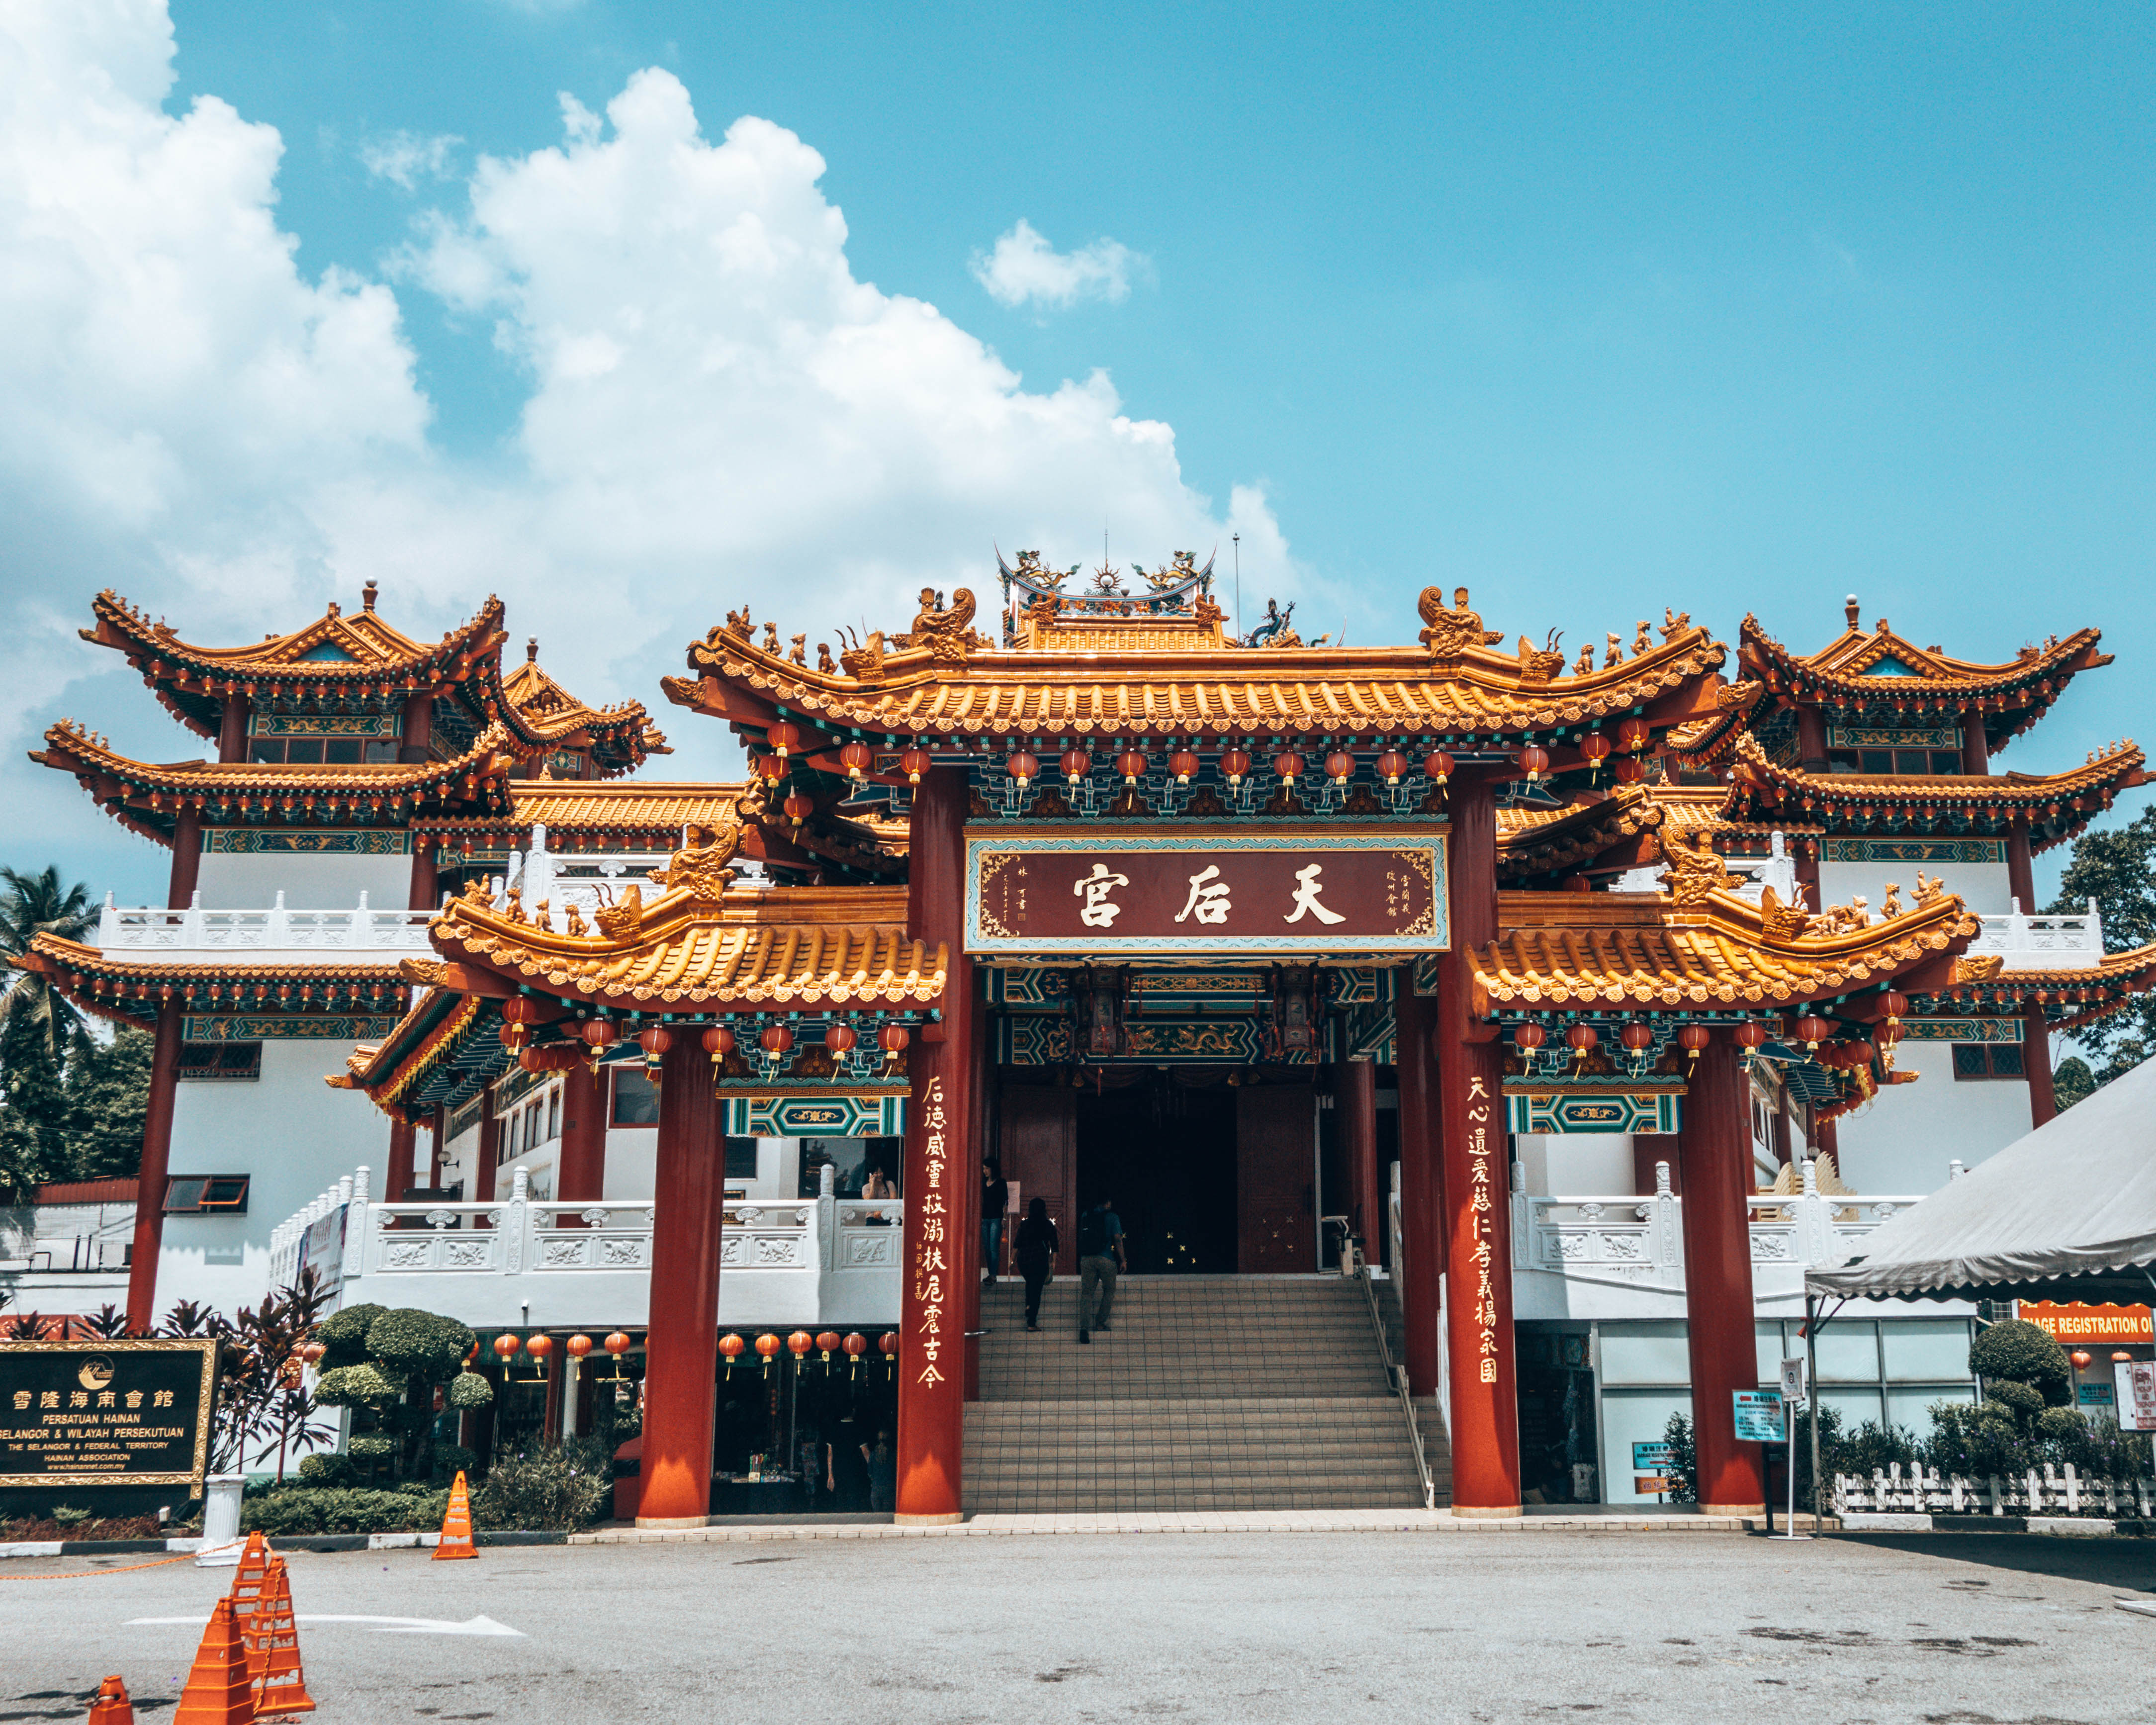 Thean Hou Temple things to do in Kuala Lumpur - wediditourway.com